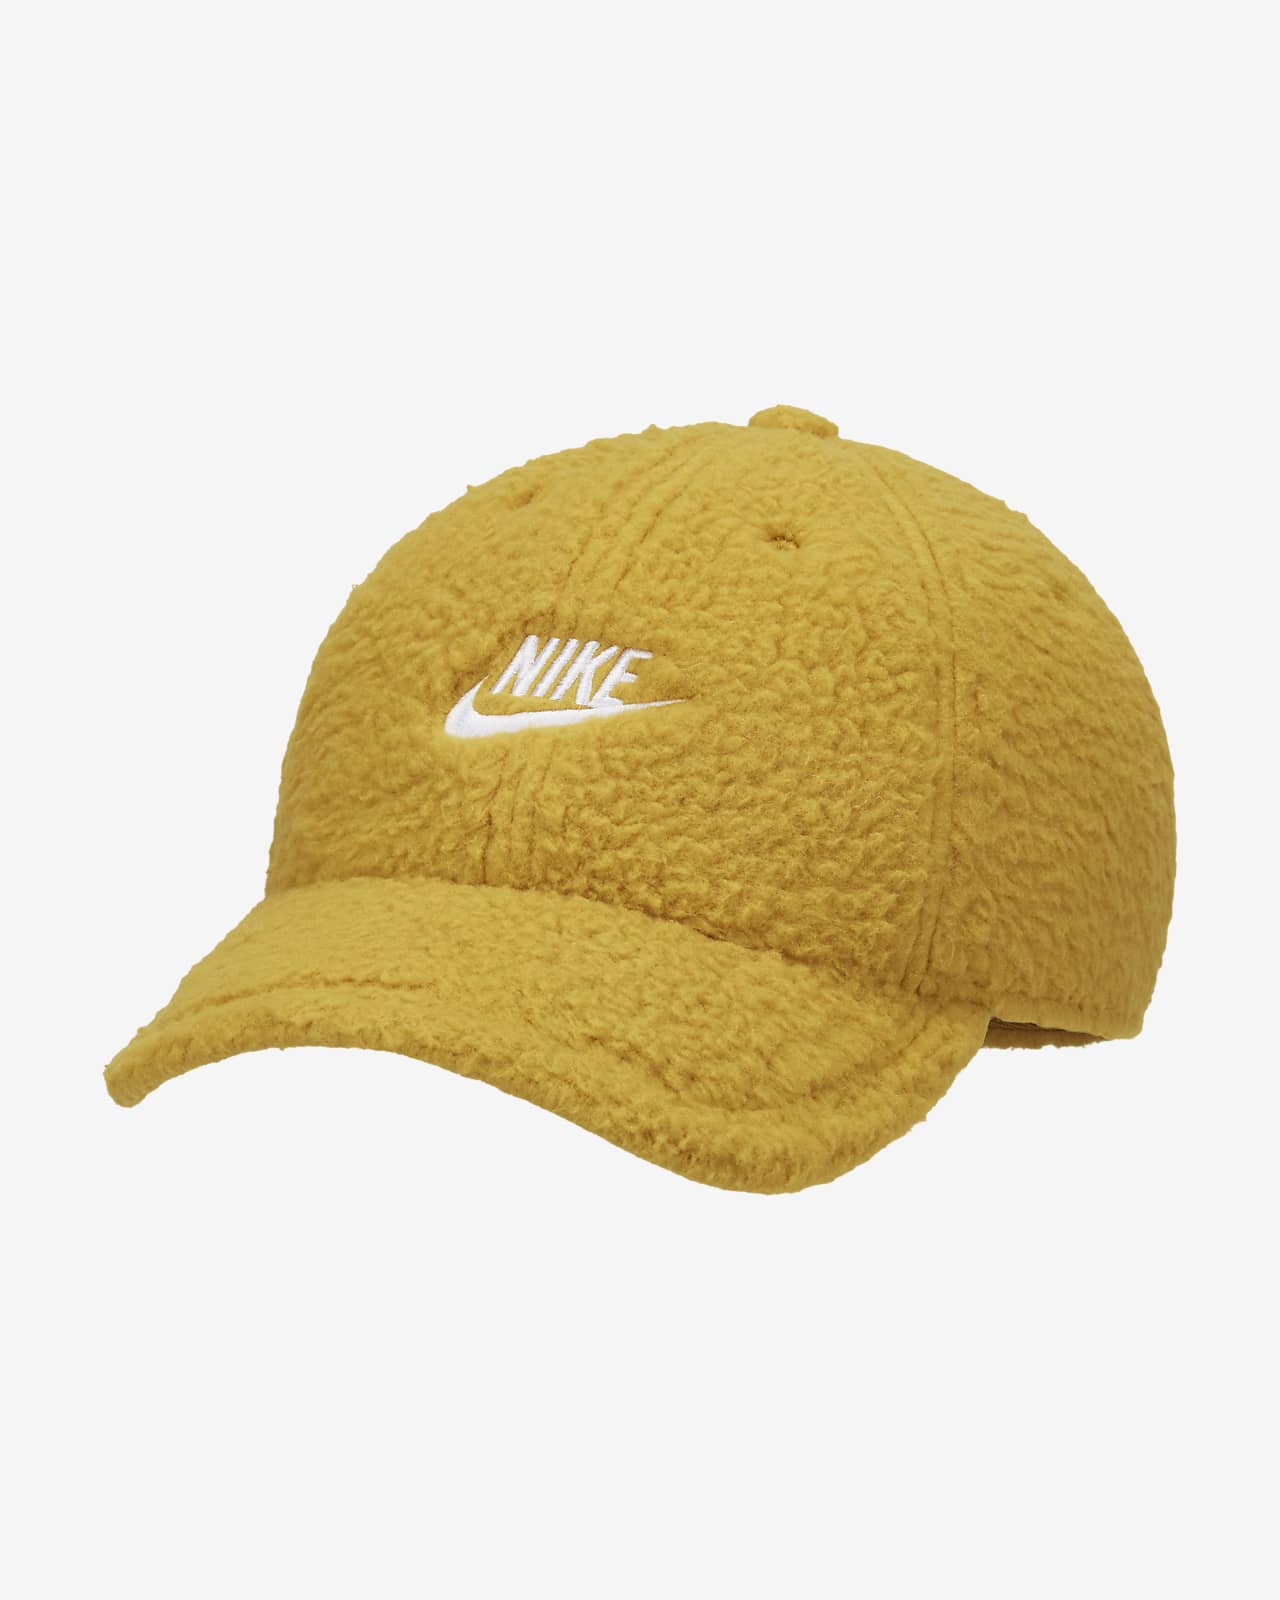 Nike Caps - Shop Nike Caps Online in South Africa